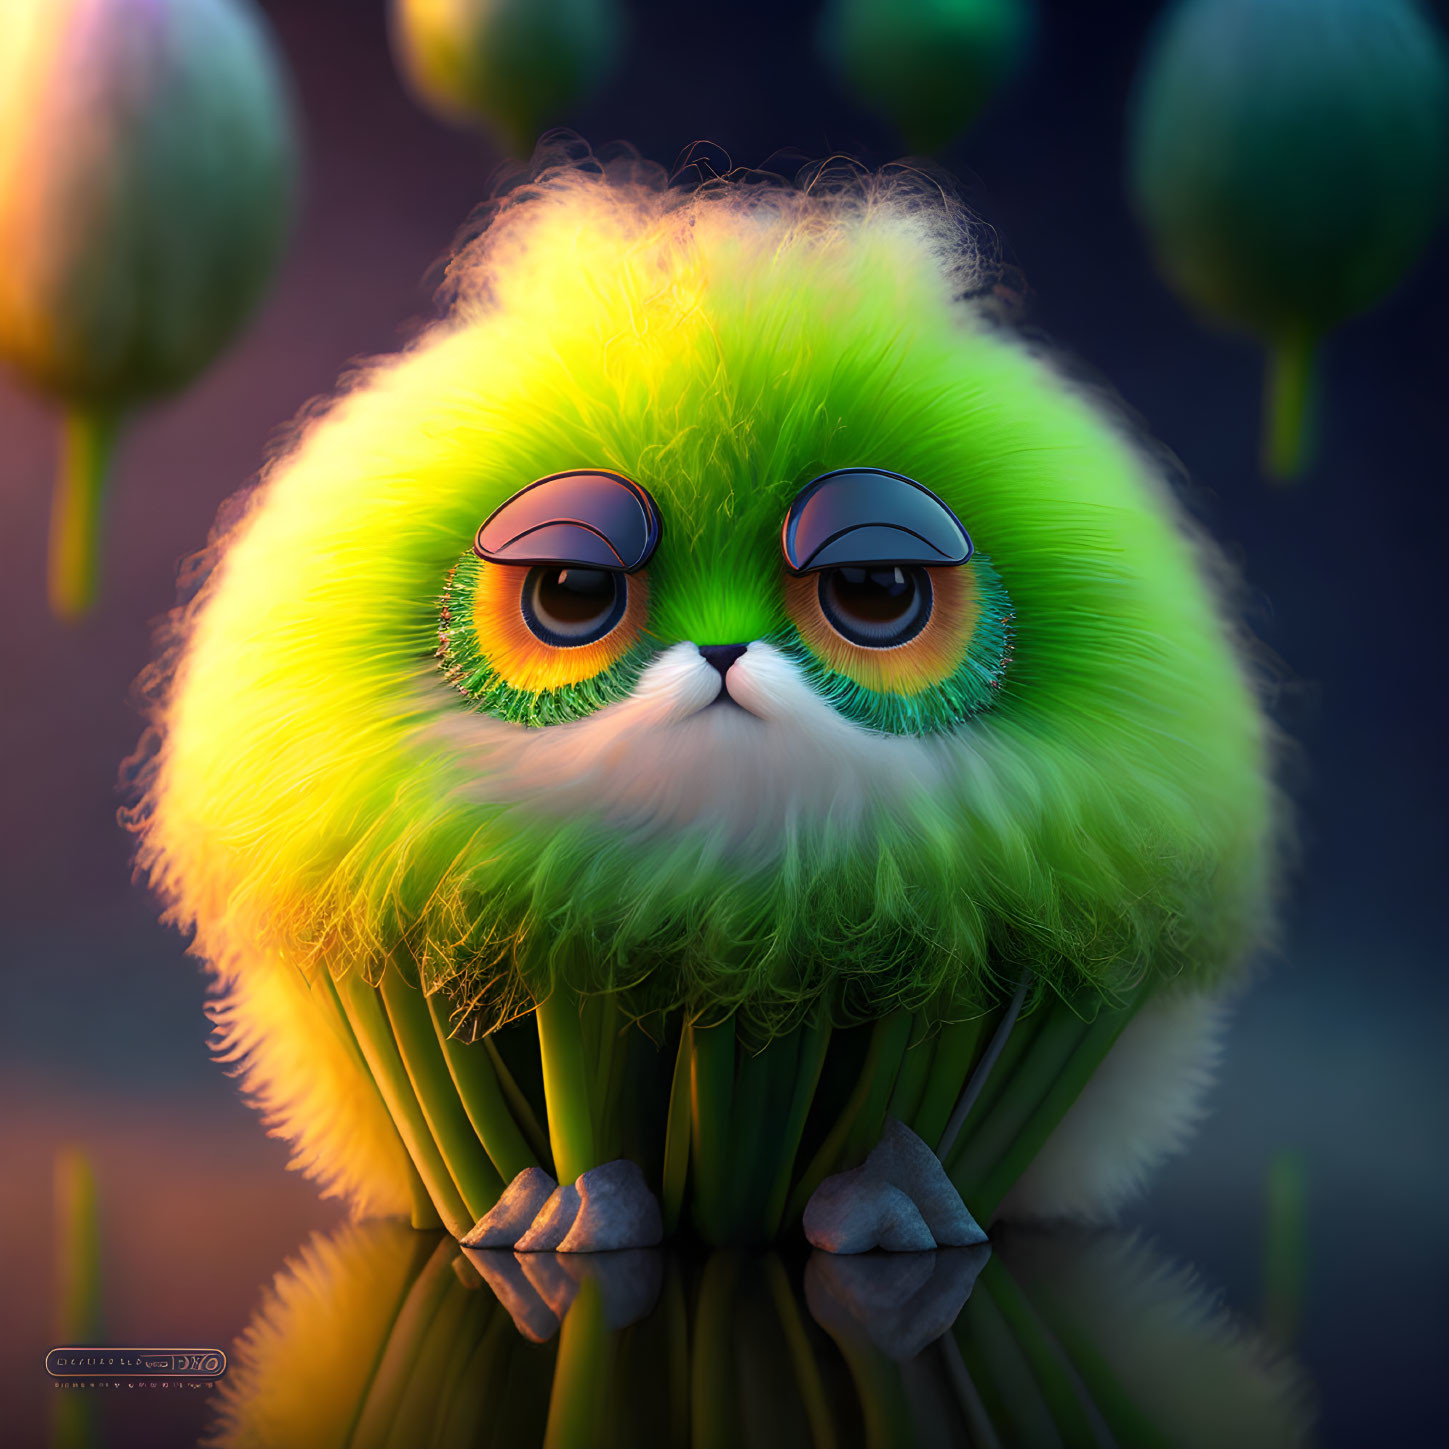 Whimsical digital creature with large eyes and green fur